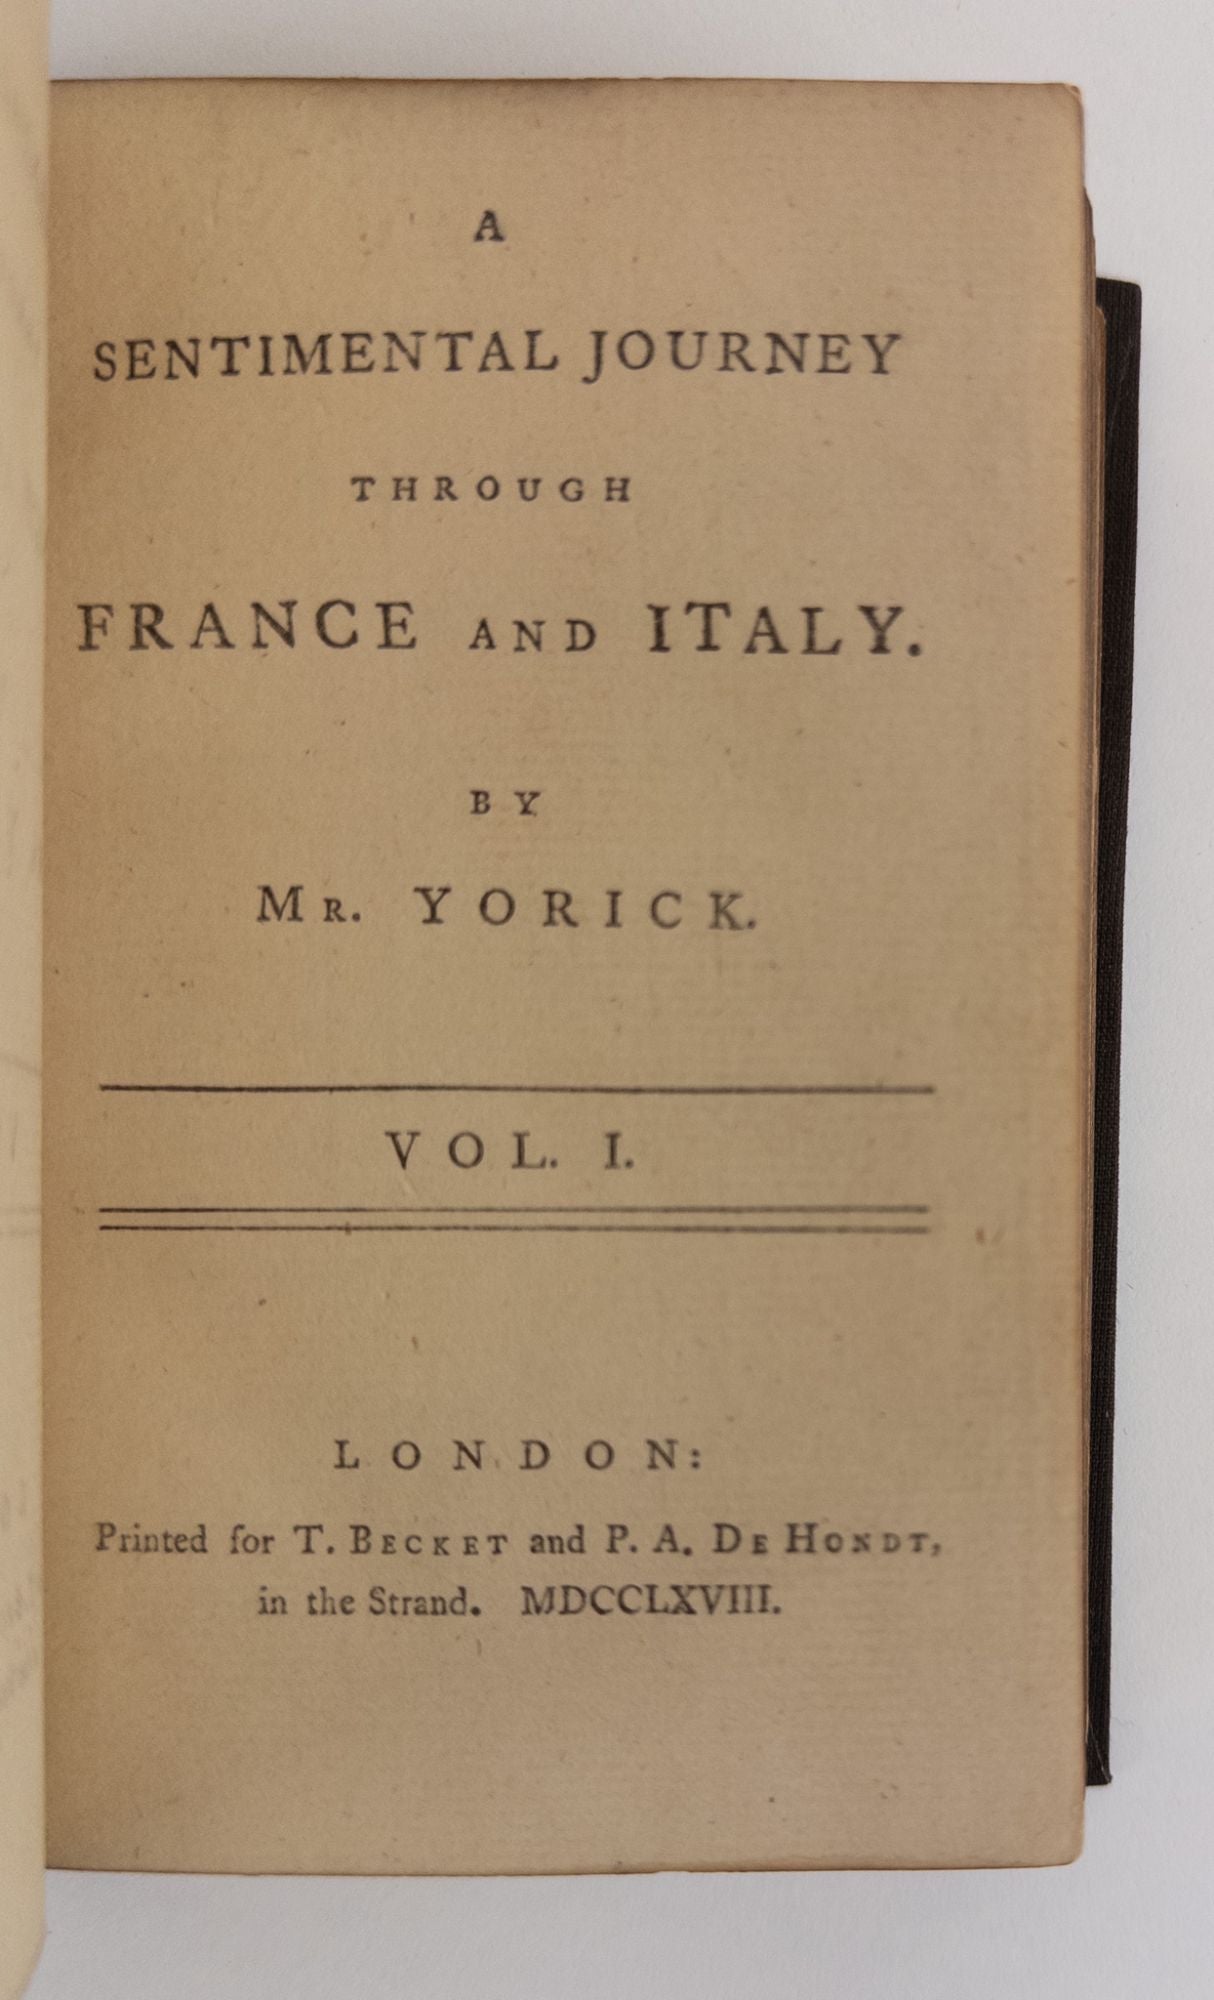 Product Image for A SENTIMENTAL JOURNEY THROUGH FRANCE AND ITALY. BY MR. YORICK. [Two Volumes]